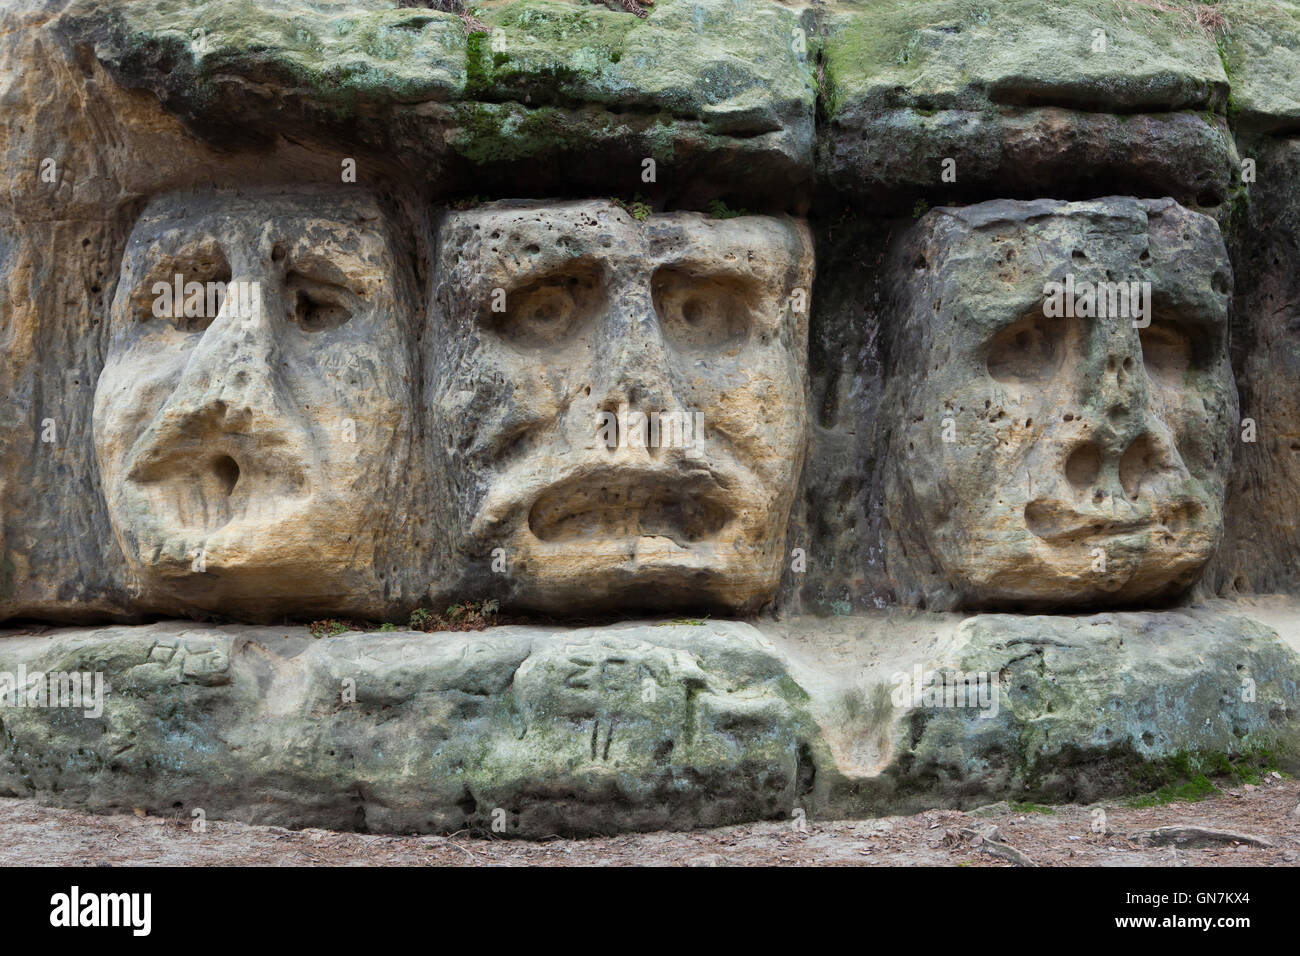 Stone faces carved by Czech sculptor Vaclav Levy in the sandstone rocks in the forest outside the village of Zelizy in Central Bohemia, Czech Republic. This complex of sculptural works known as the Harfenice (Harpist) was created by Vaclav Levy during the 1840s together with the Devil's Heads and the Klacelka Cave located in the forest nearby. Stock Photo